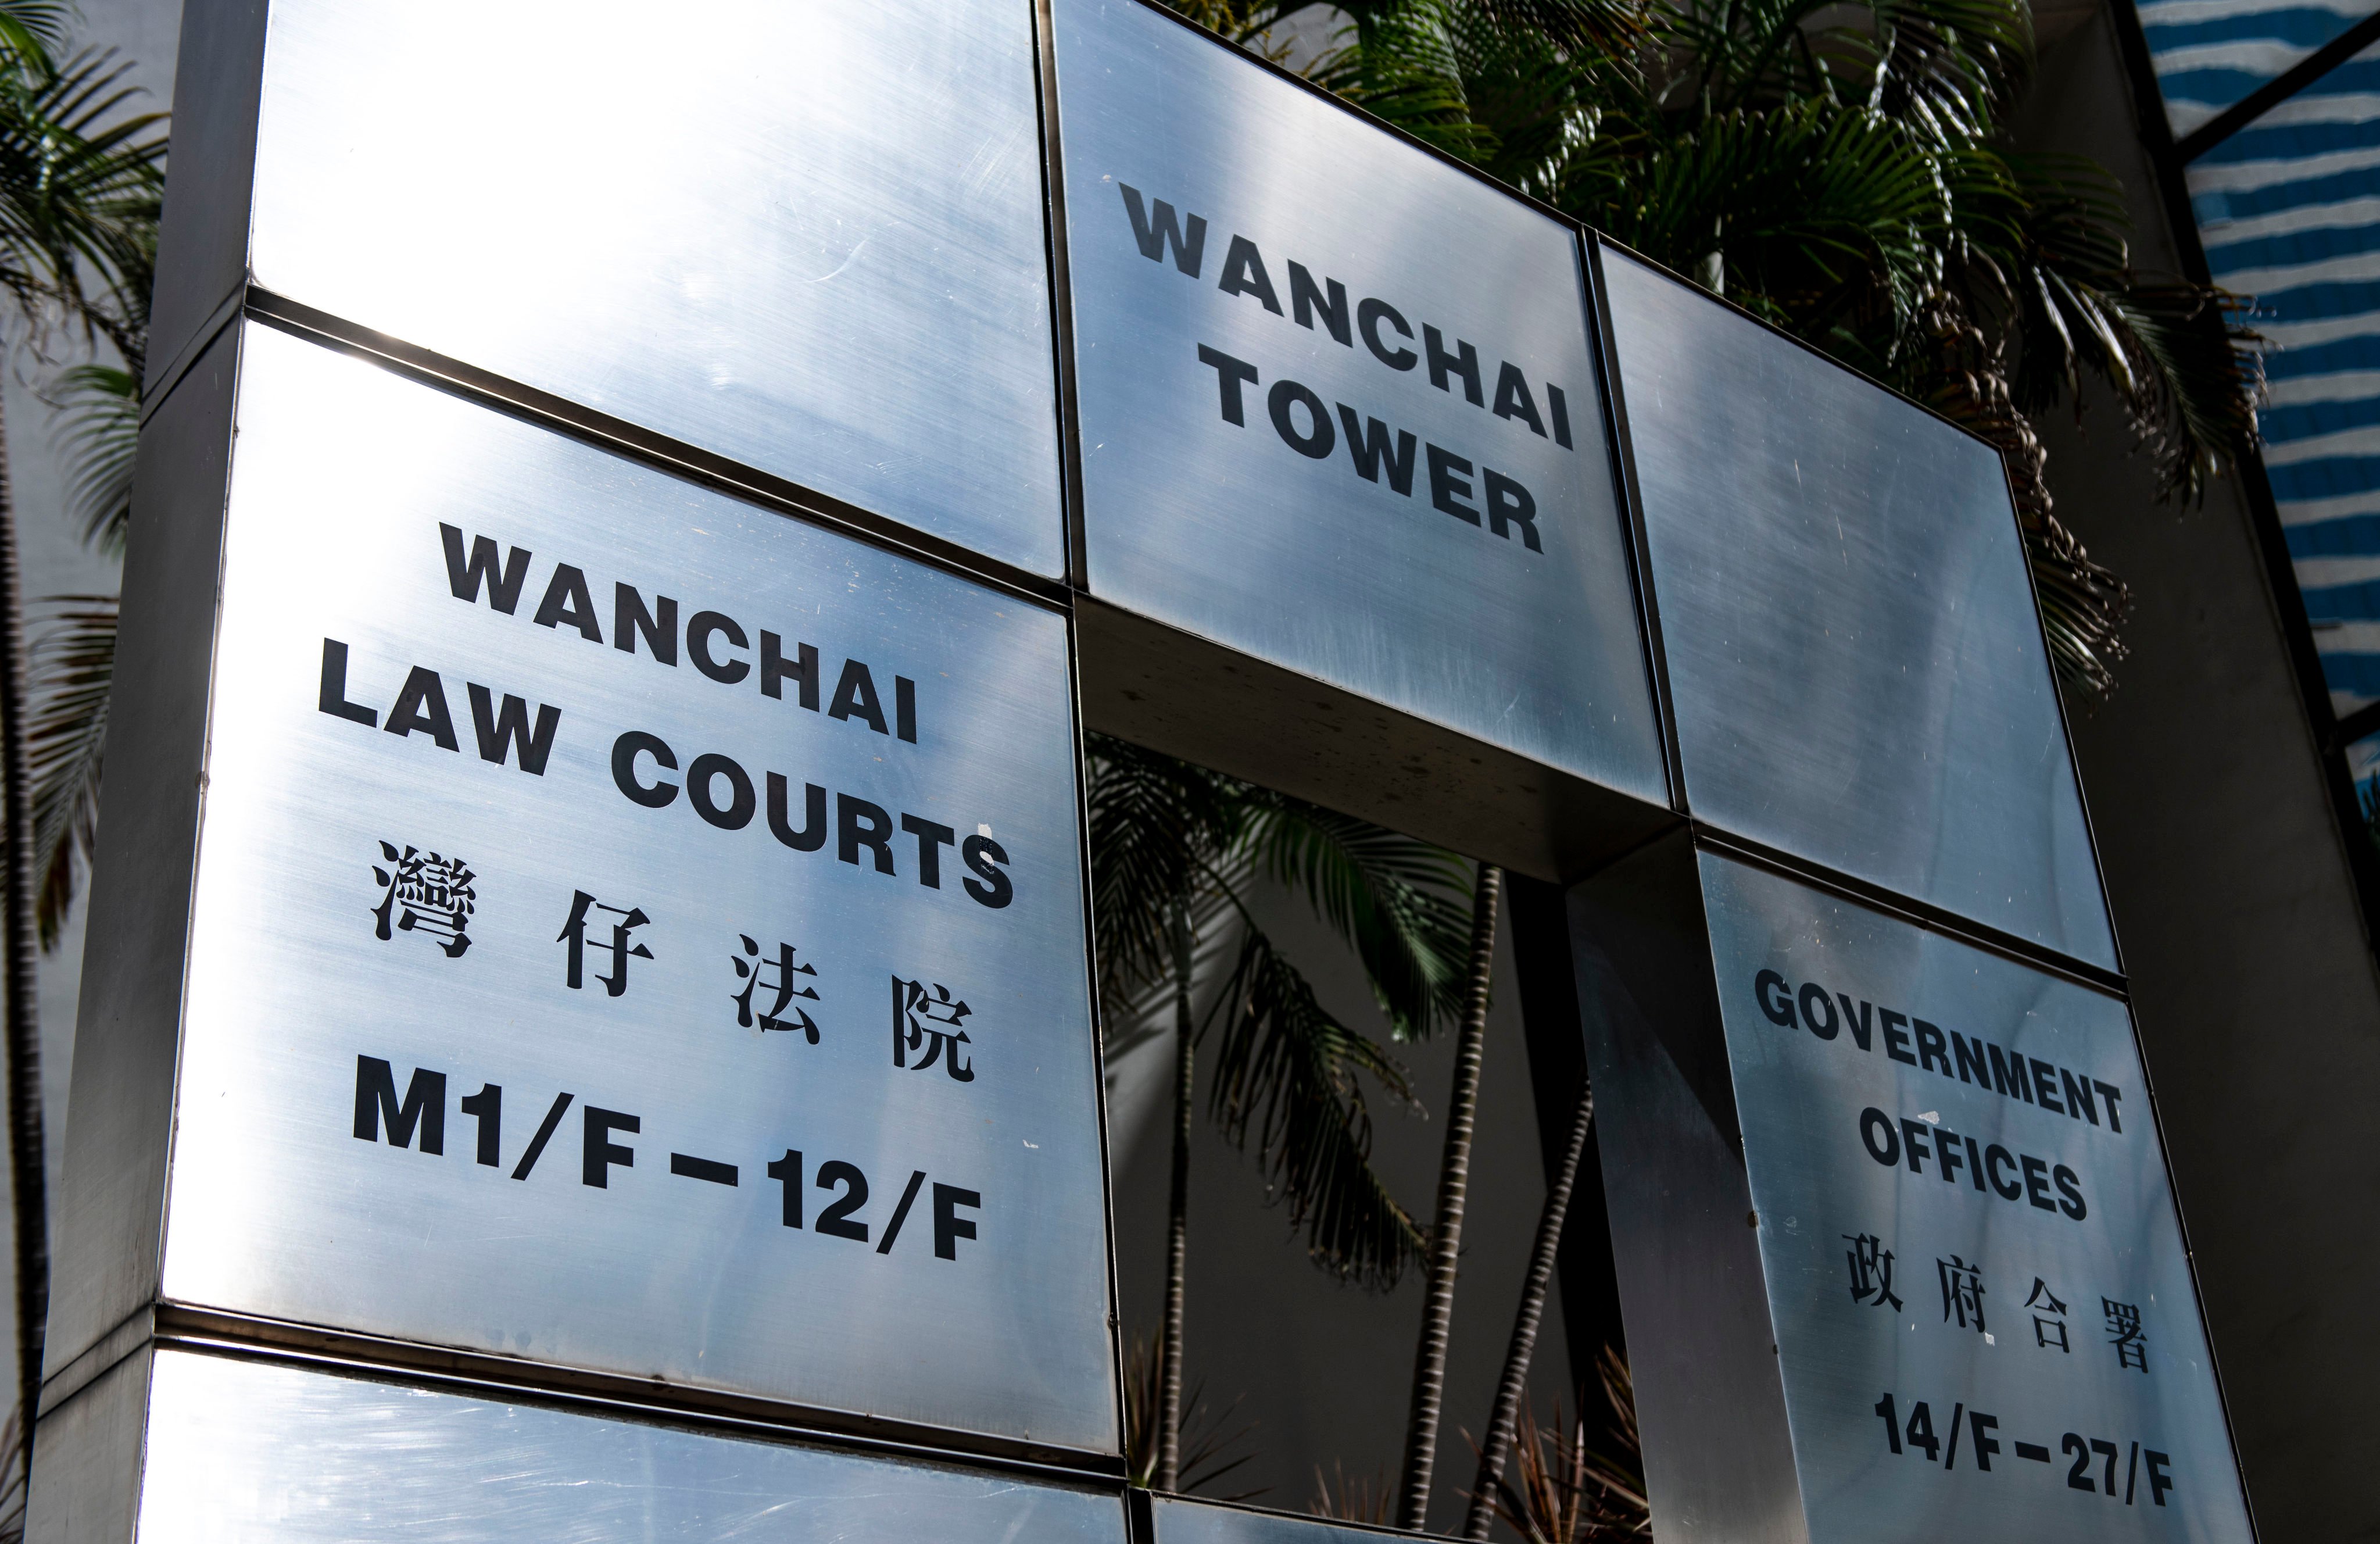 Two former executives of separate construction firms were sentenced to 4 years in jail each for their role in letters of credit scam. Photo: Warton Li